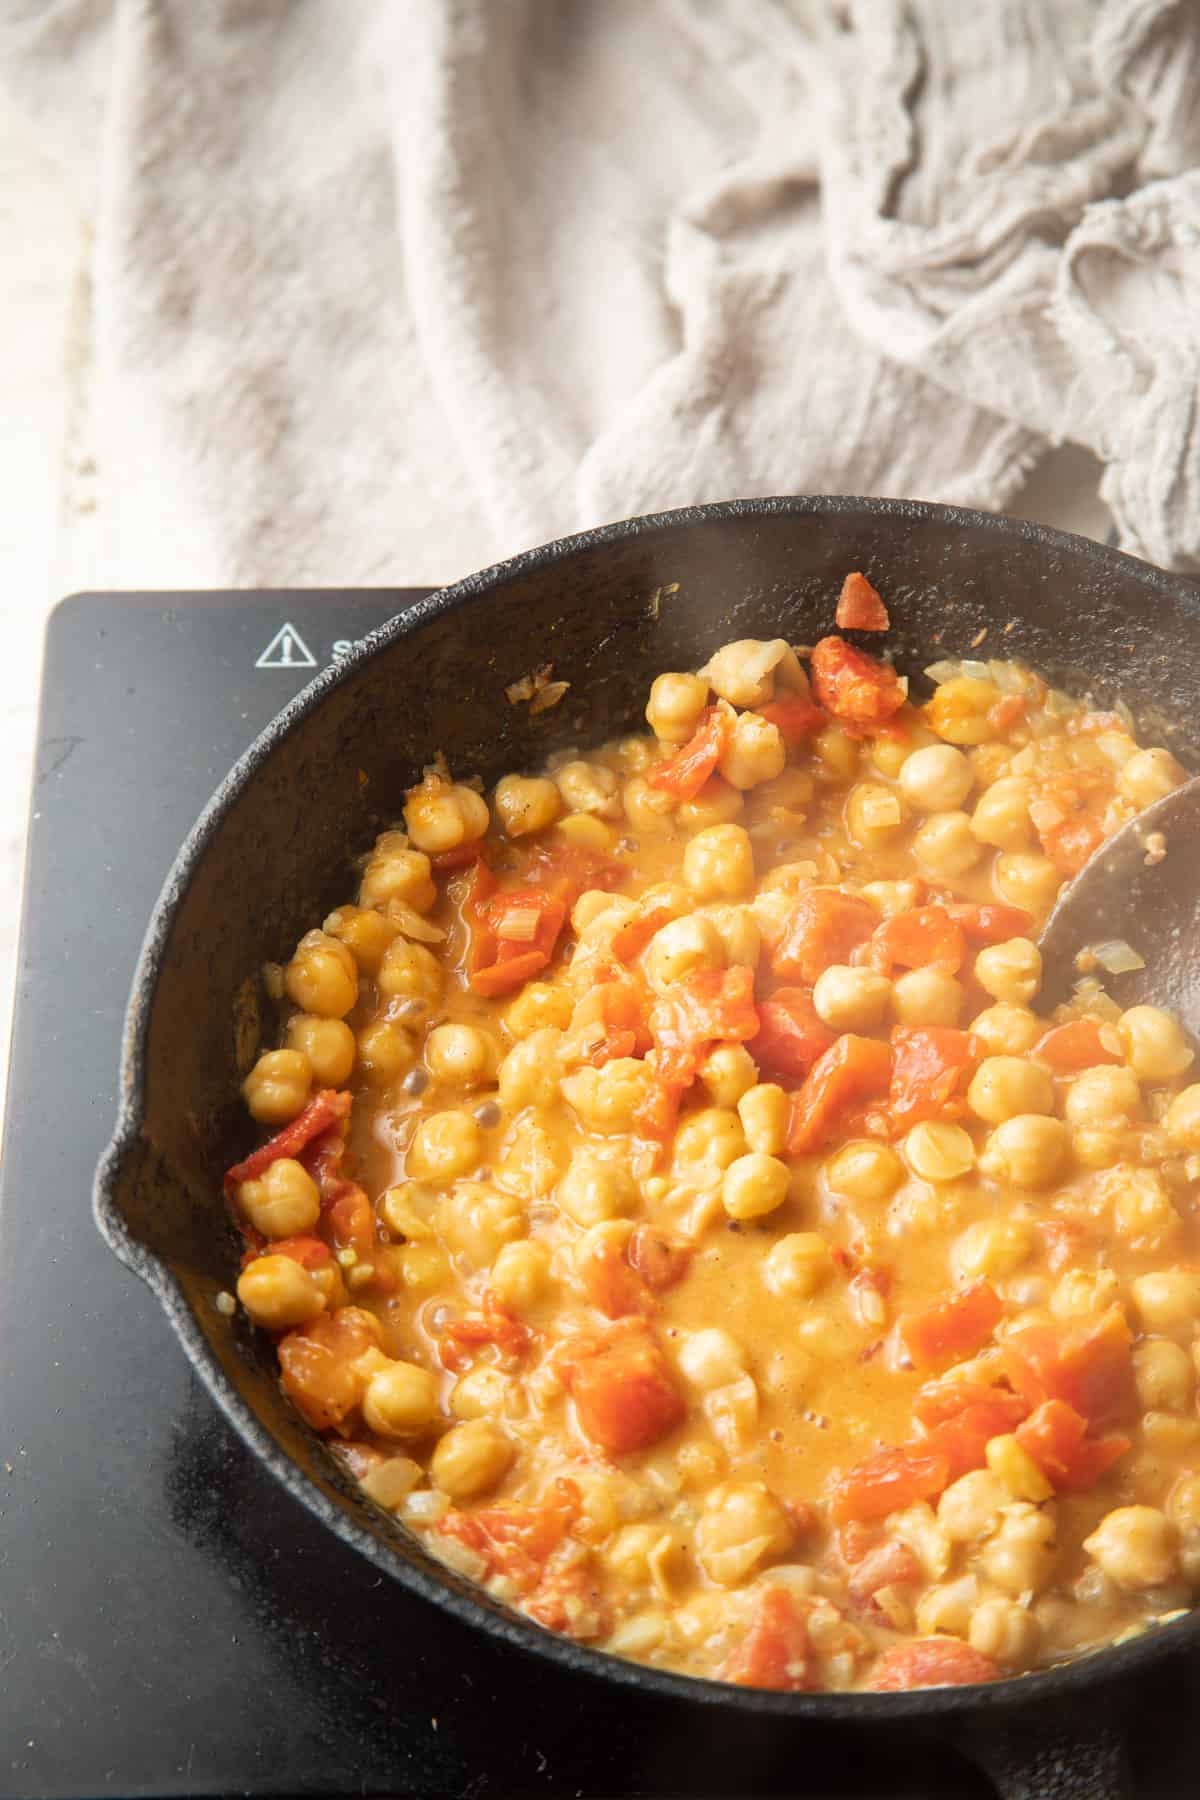 Chickpeas, tomatoes and coconut milk simmering in a skillet.